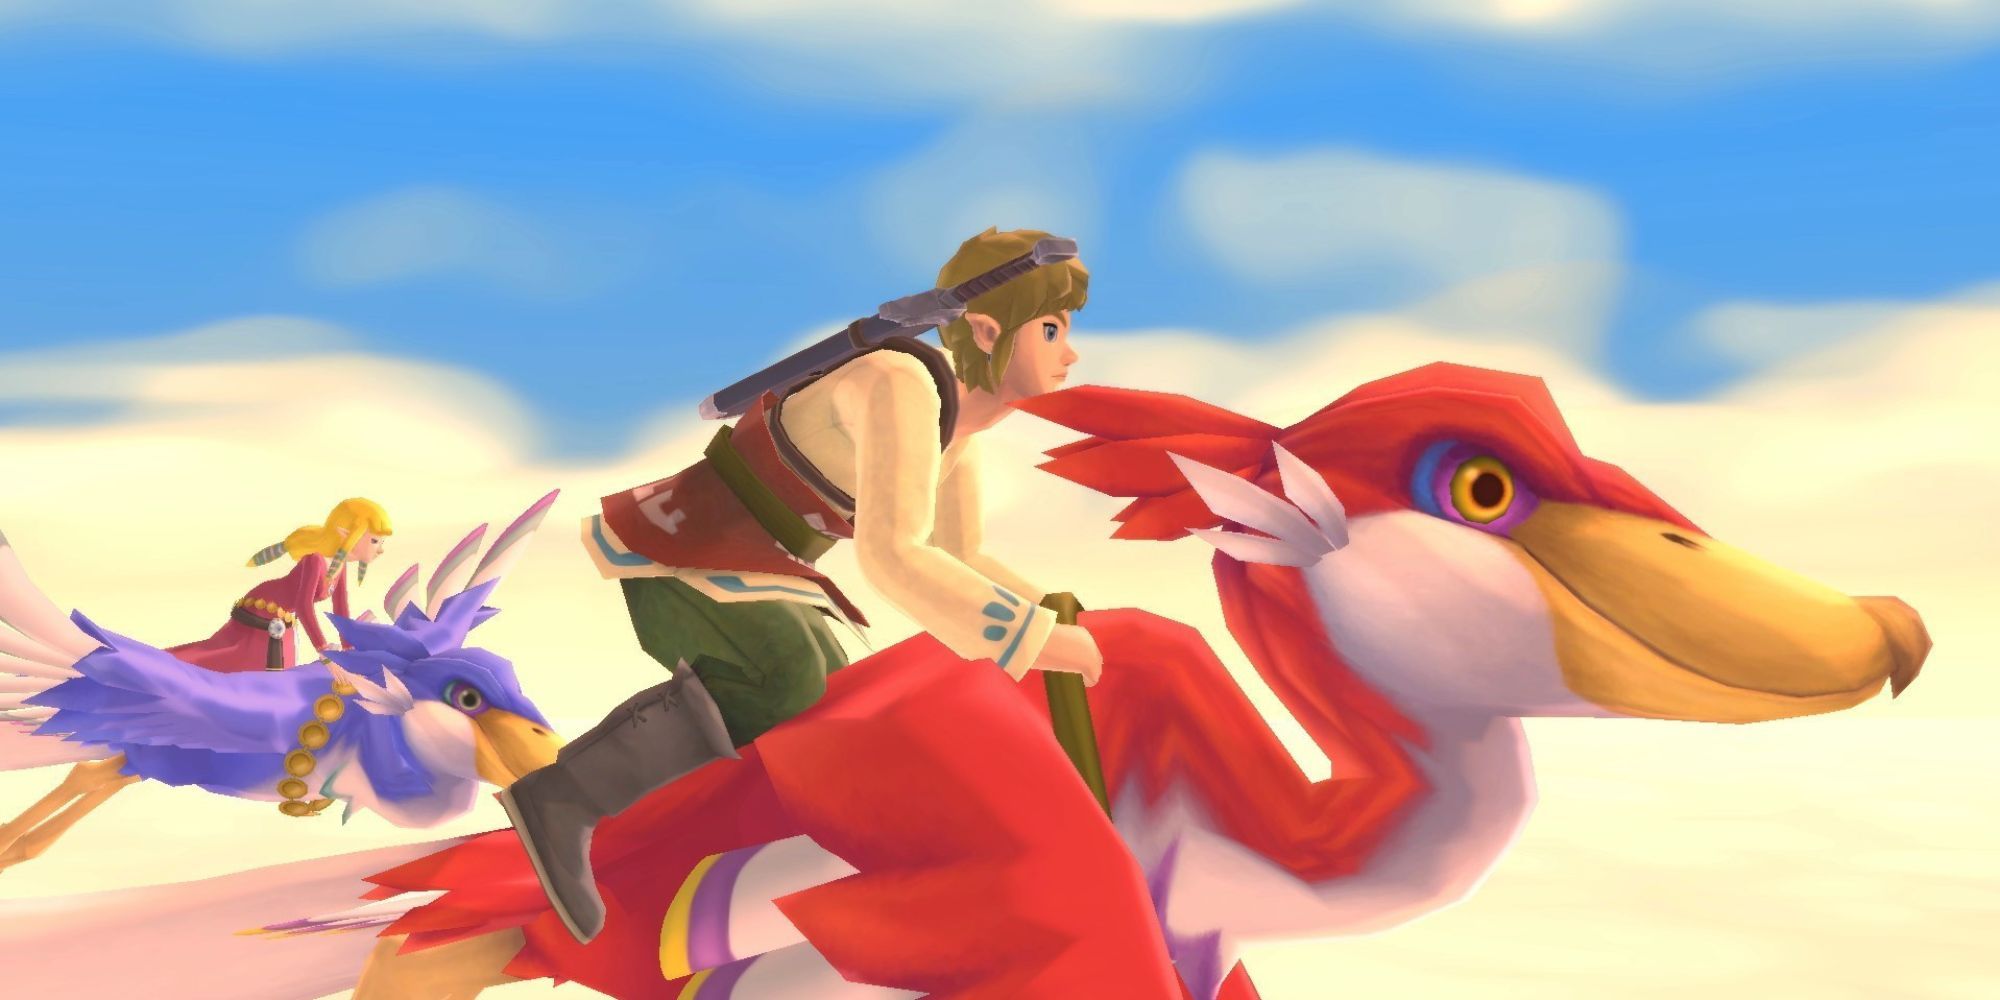 Link and Zelda ride Loftwings together in the sky